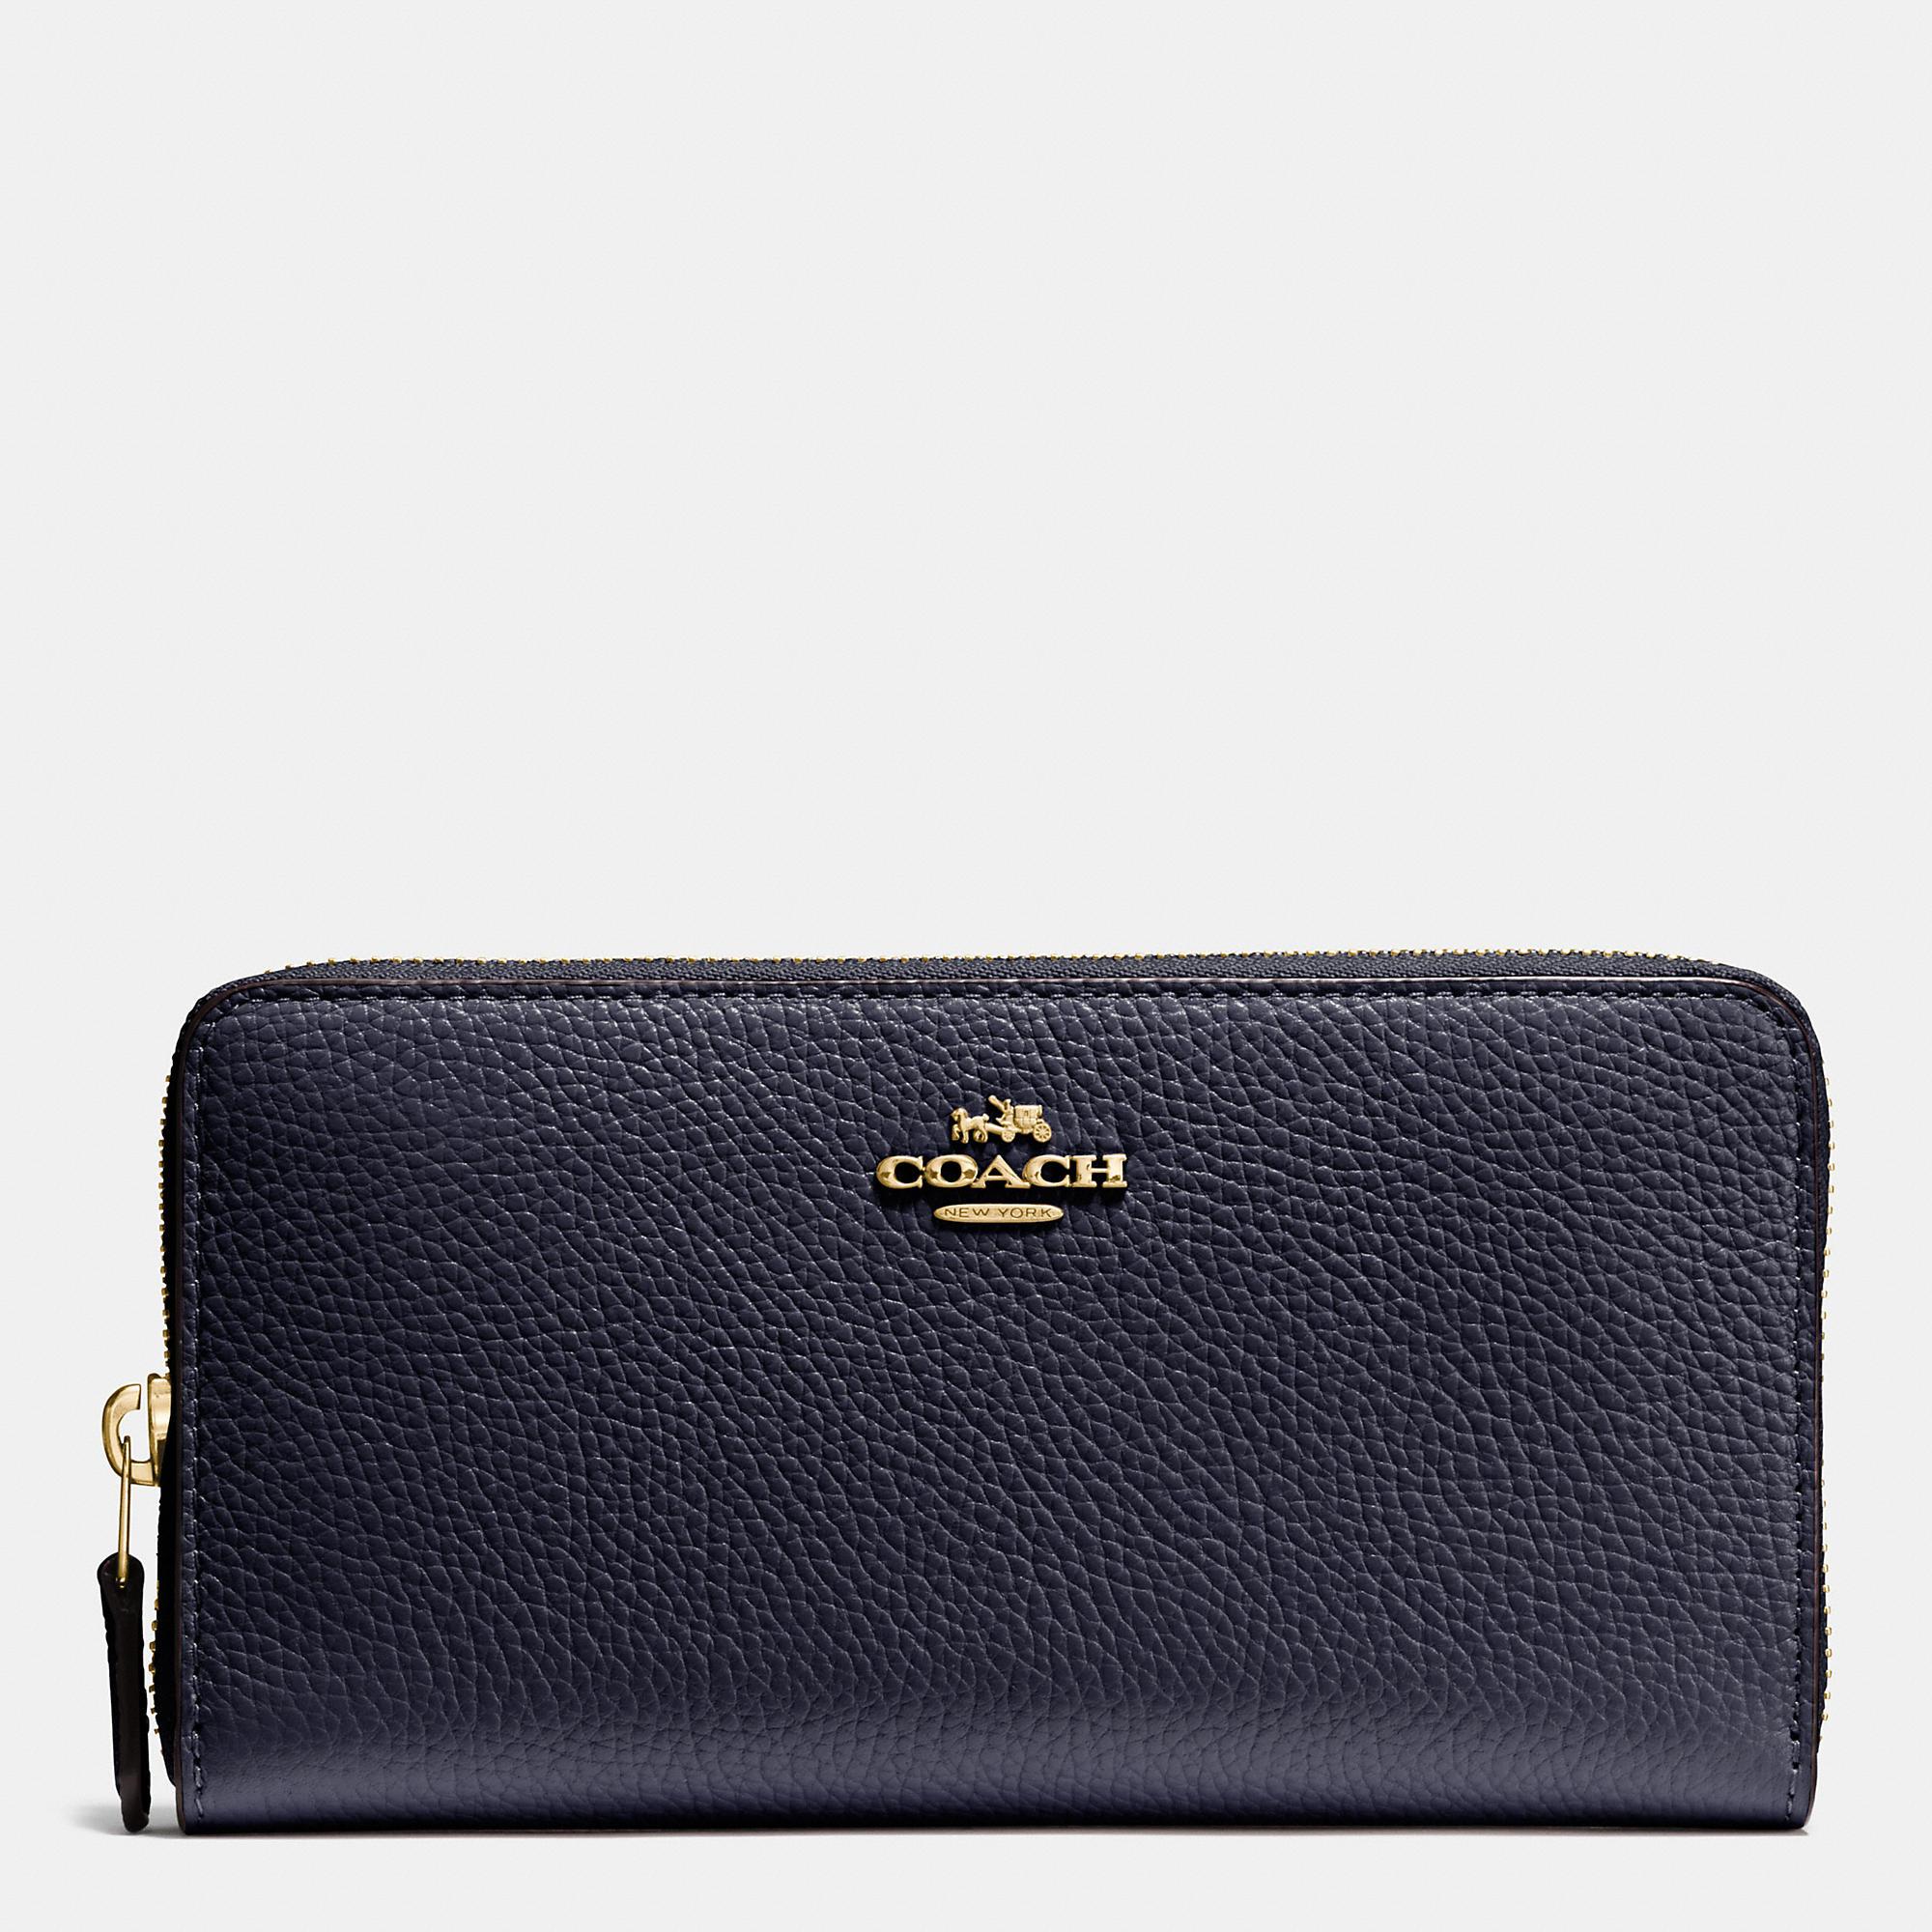 Coach Accordion Zip Wallet In Polished Pebble Leather in Blue | Lyst